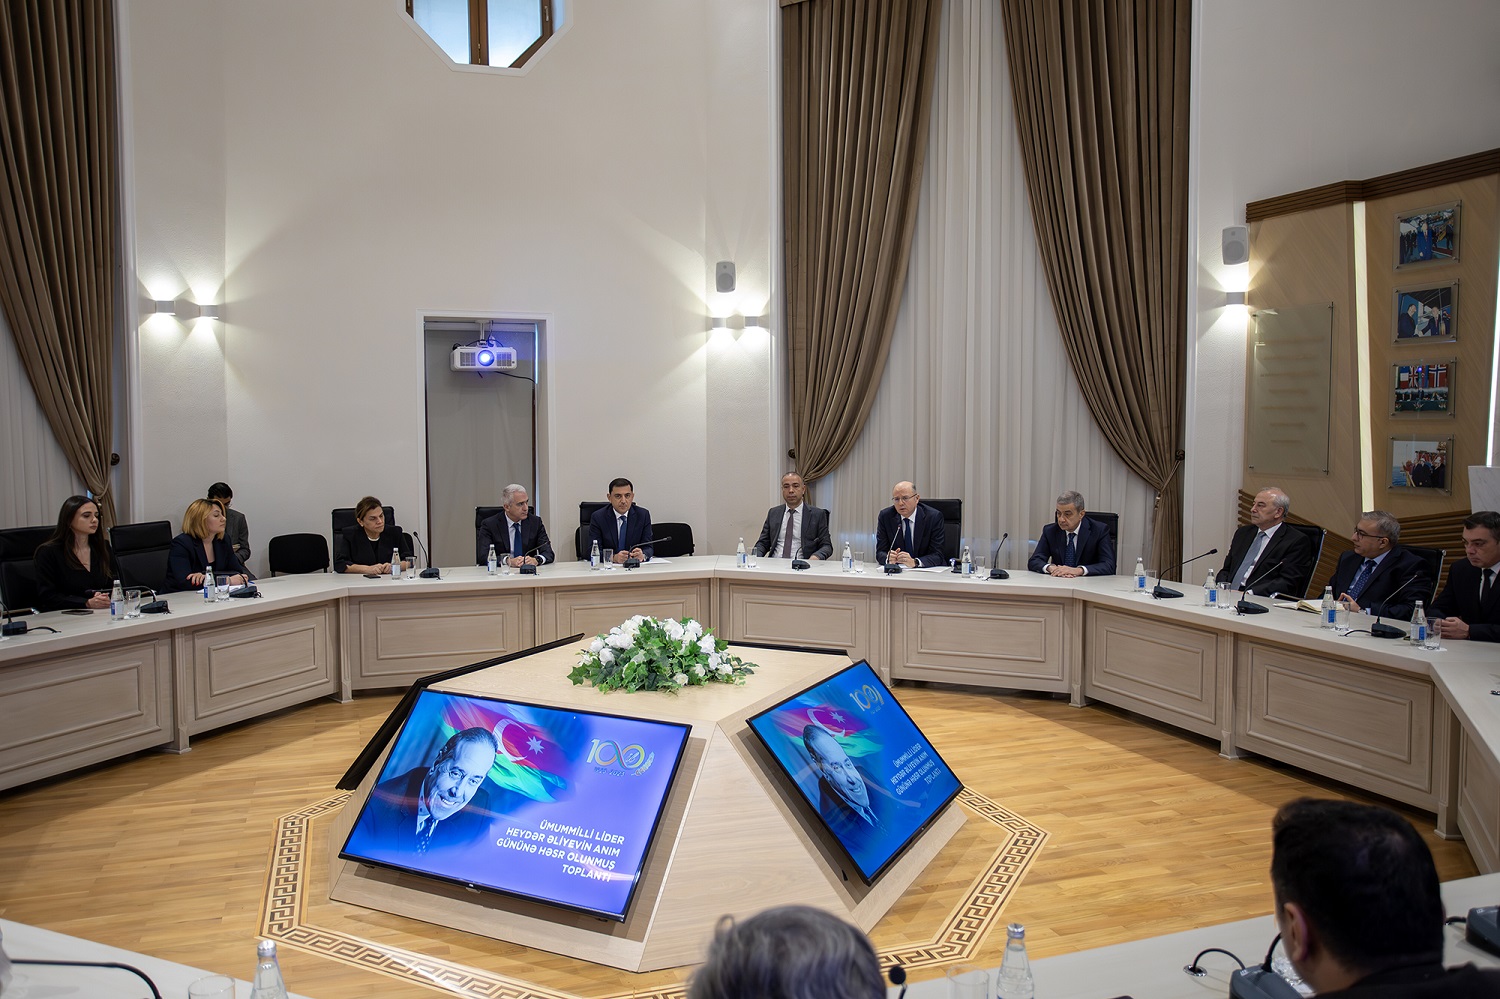 A commemorative event dedicated to the memory of Heydar Aliyev was held at the Ministry of Energy